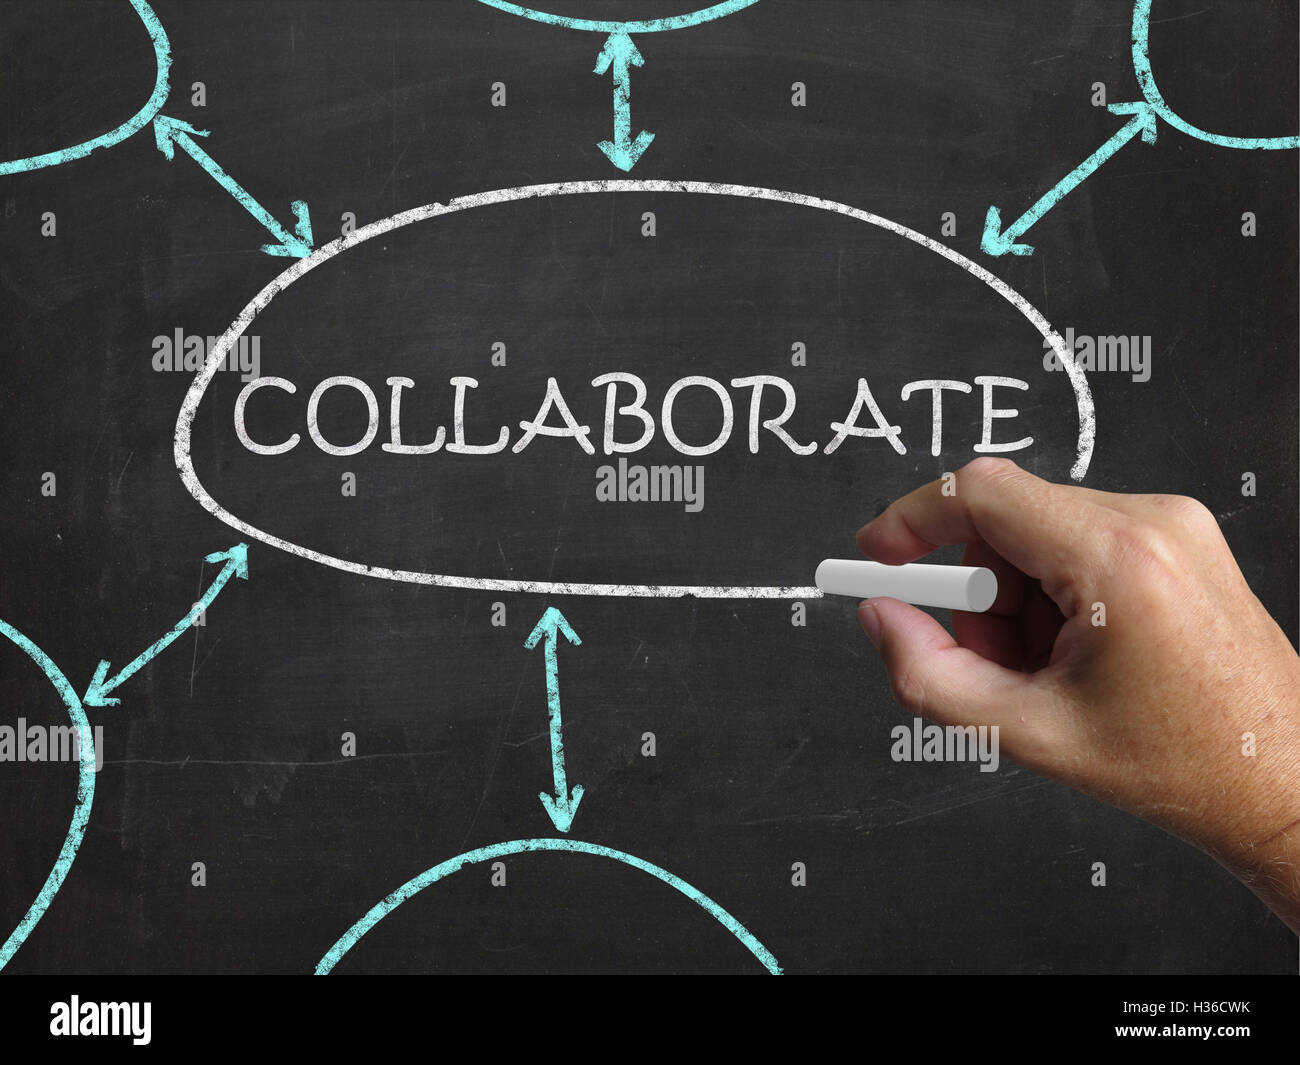 Collaborate Blackboard Shows Working Together And Synergy Stock Photo